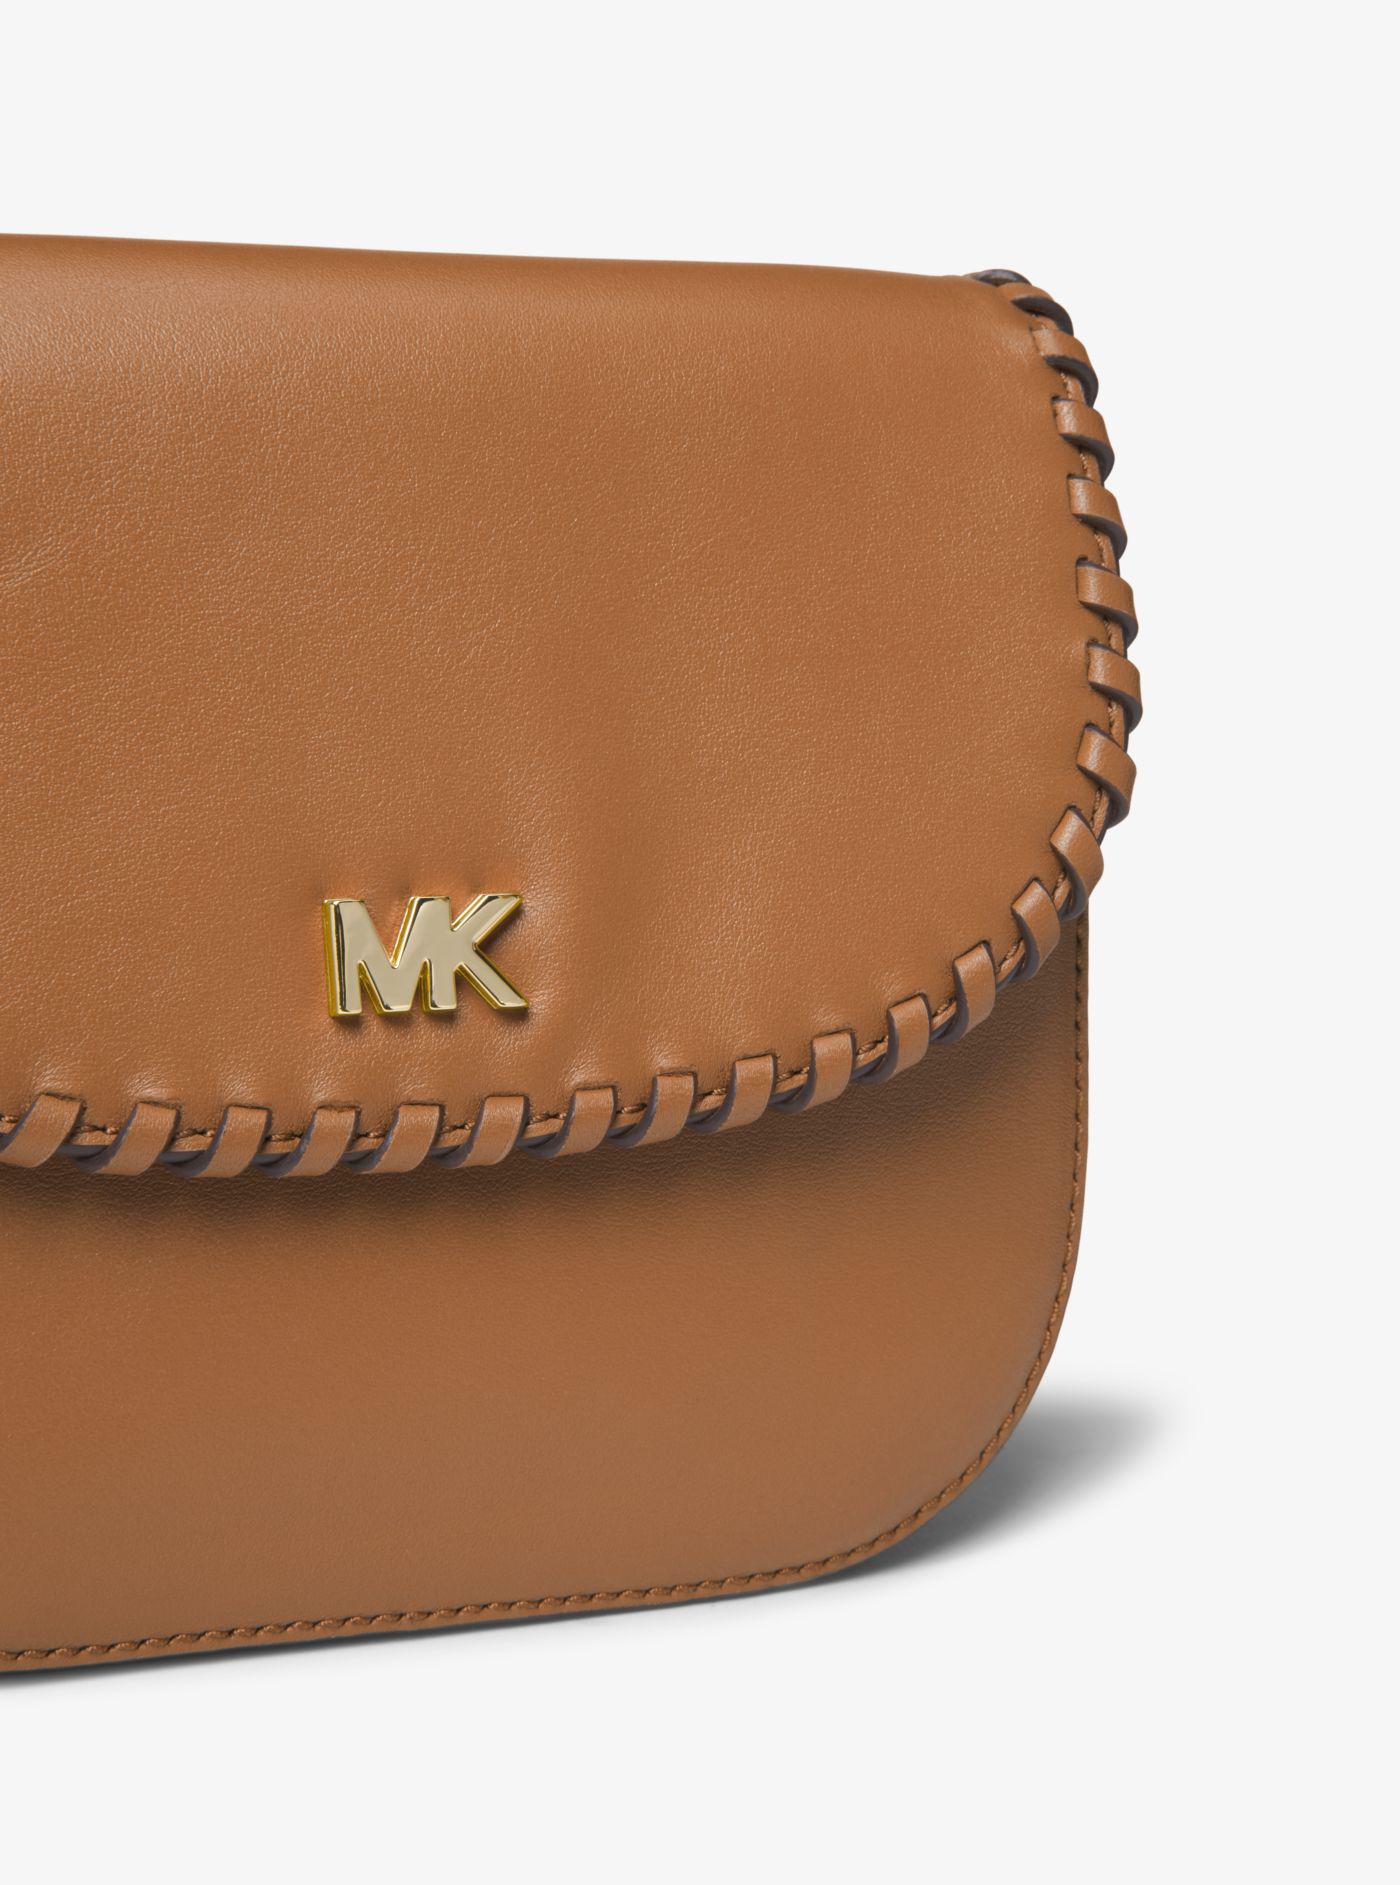 Michael Kors Whipstitched Leather 